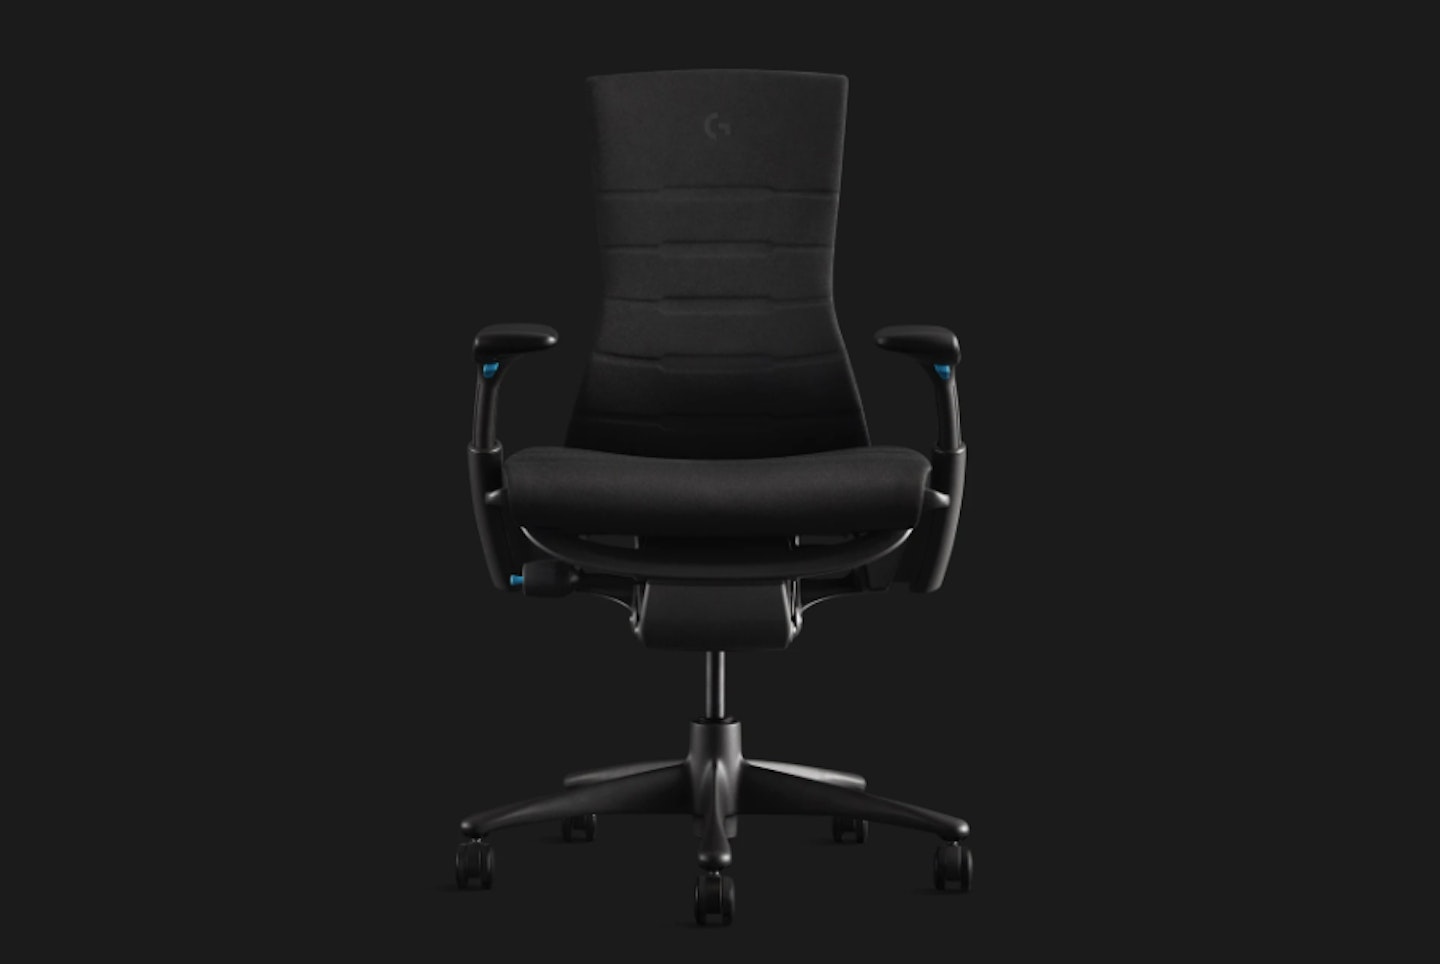 Logitech’s new gaming chair costs over £1000